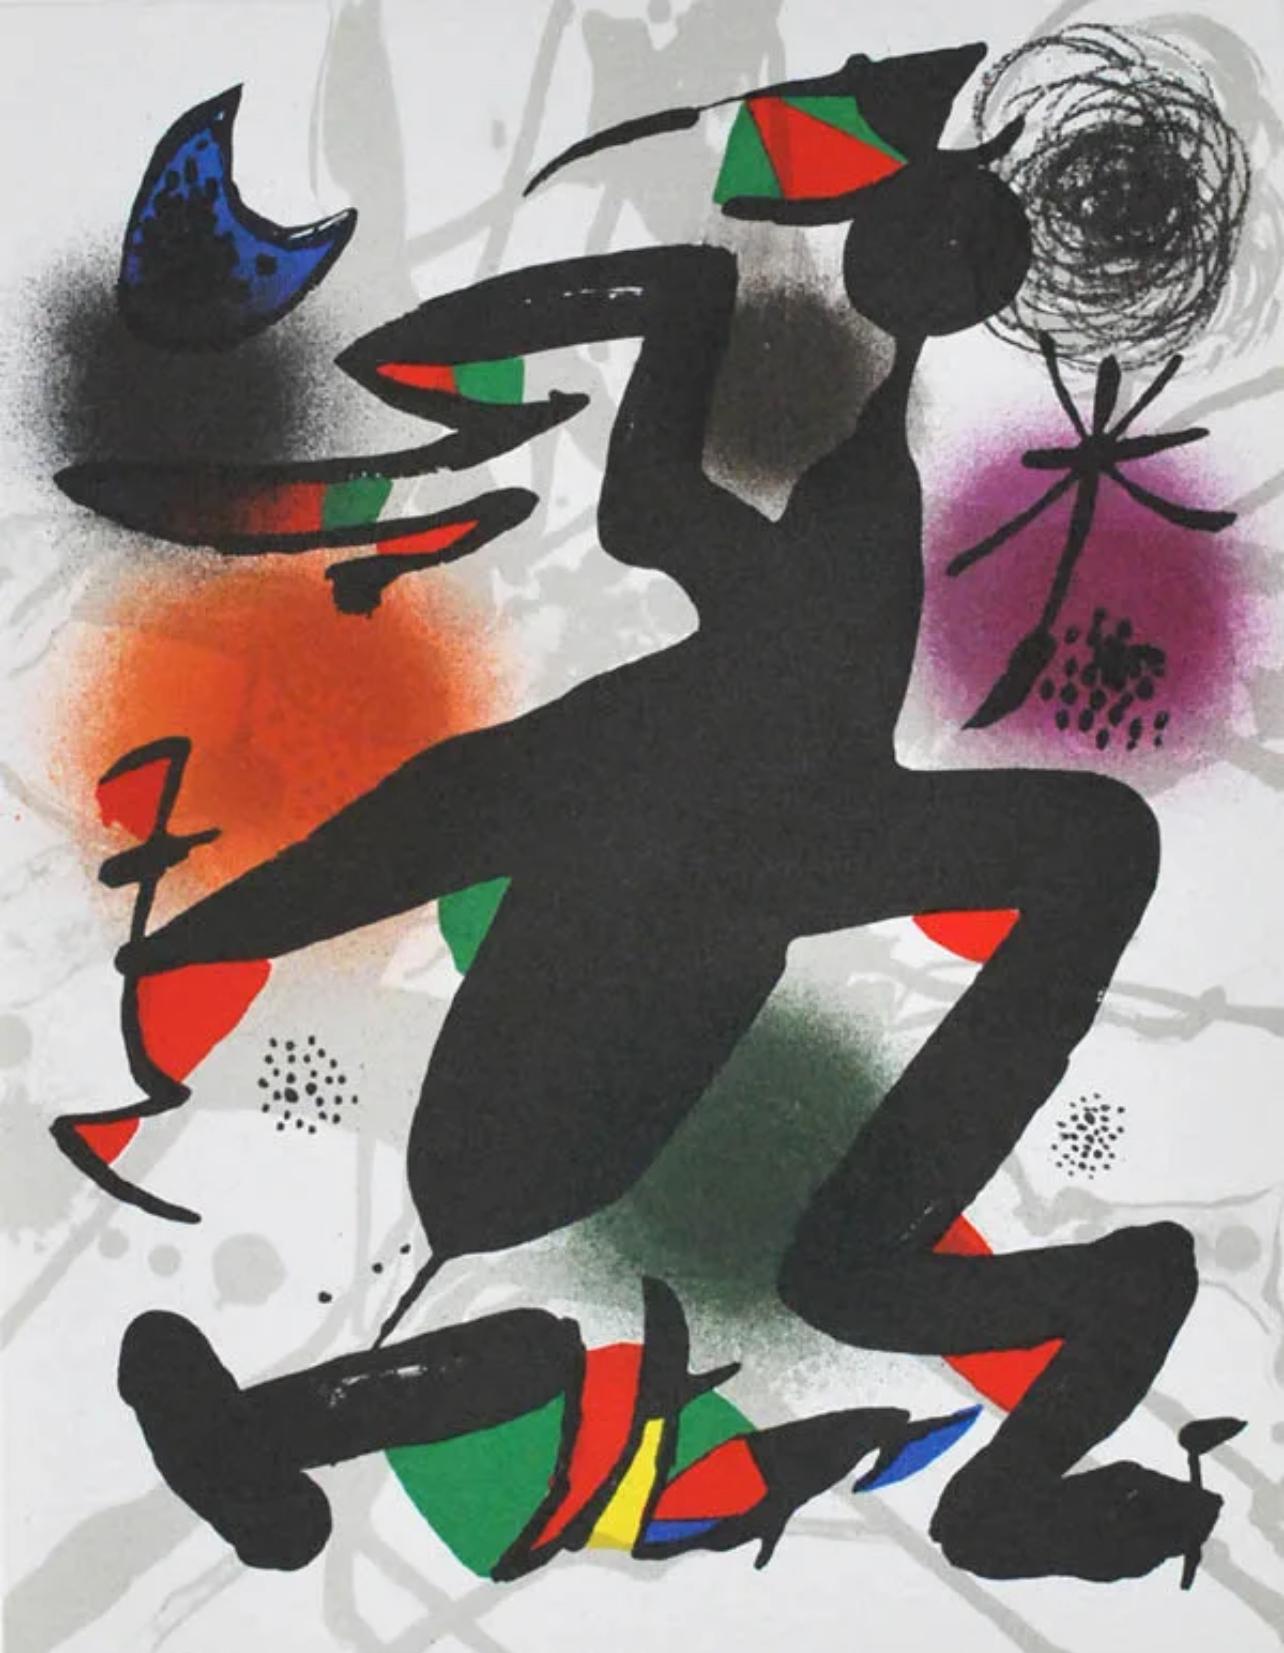 Joan Miró Abstract Print - Miro, Composition (Mourlot 1116), 1977 (after)